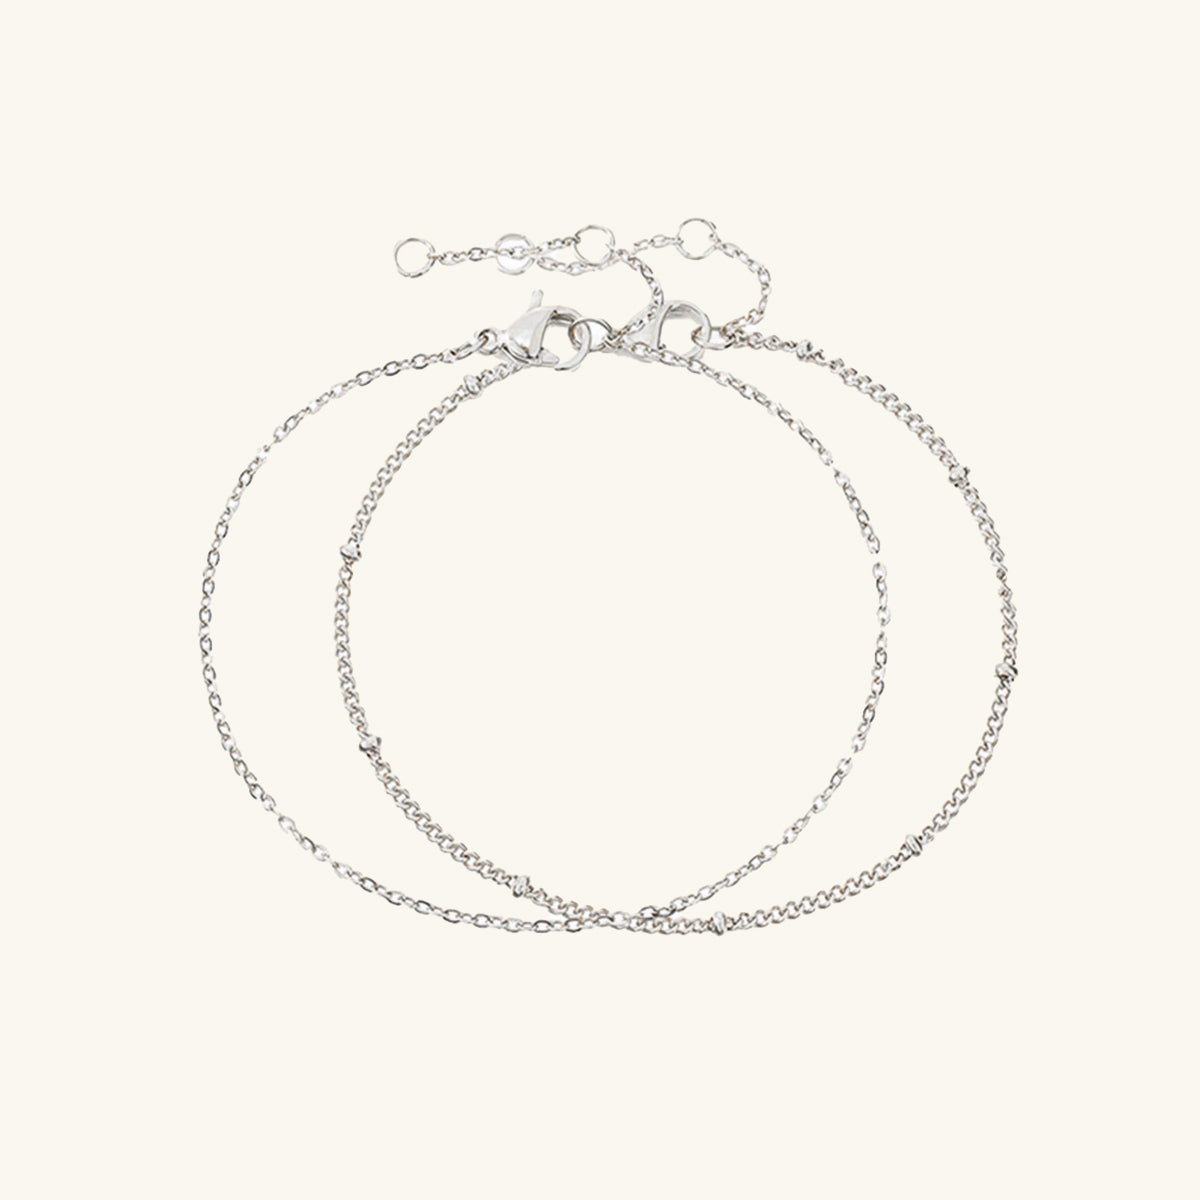 Double-Layered Ball Chain Bracelet - Wrenlee